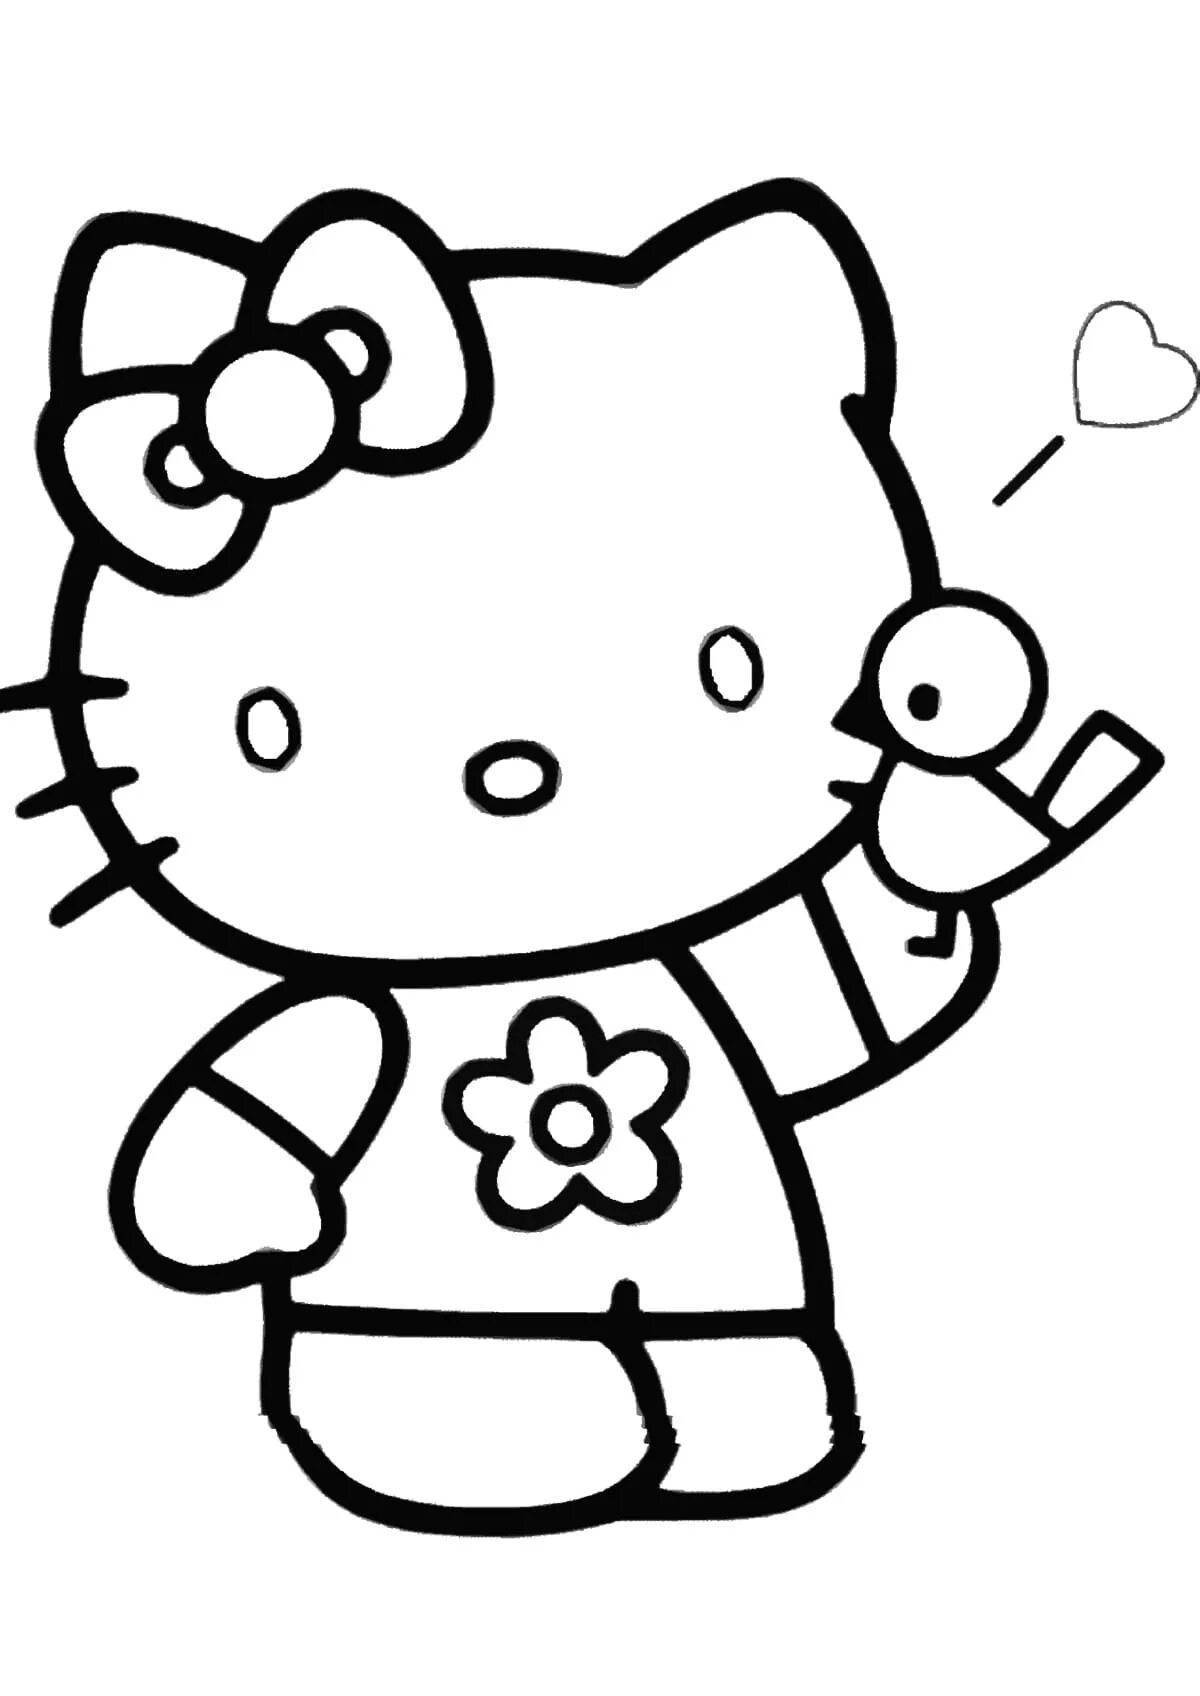 Elegant hello kitty coloring without clothes